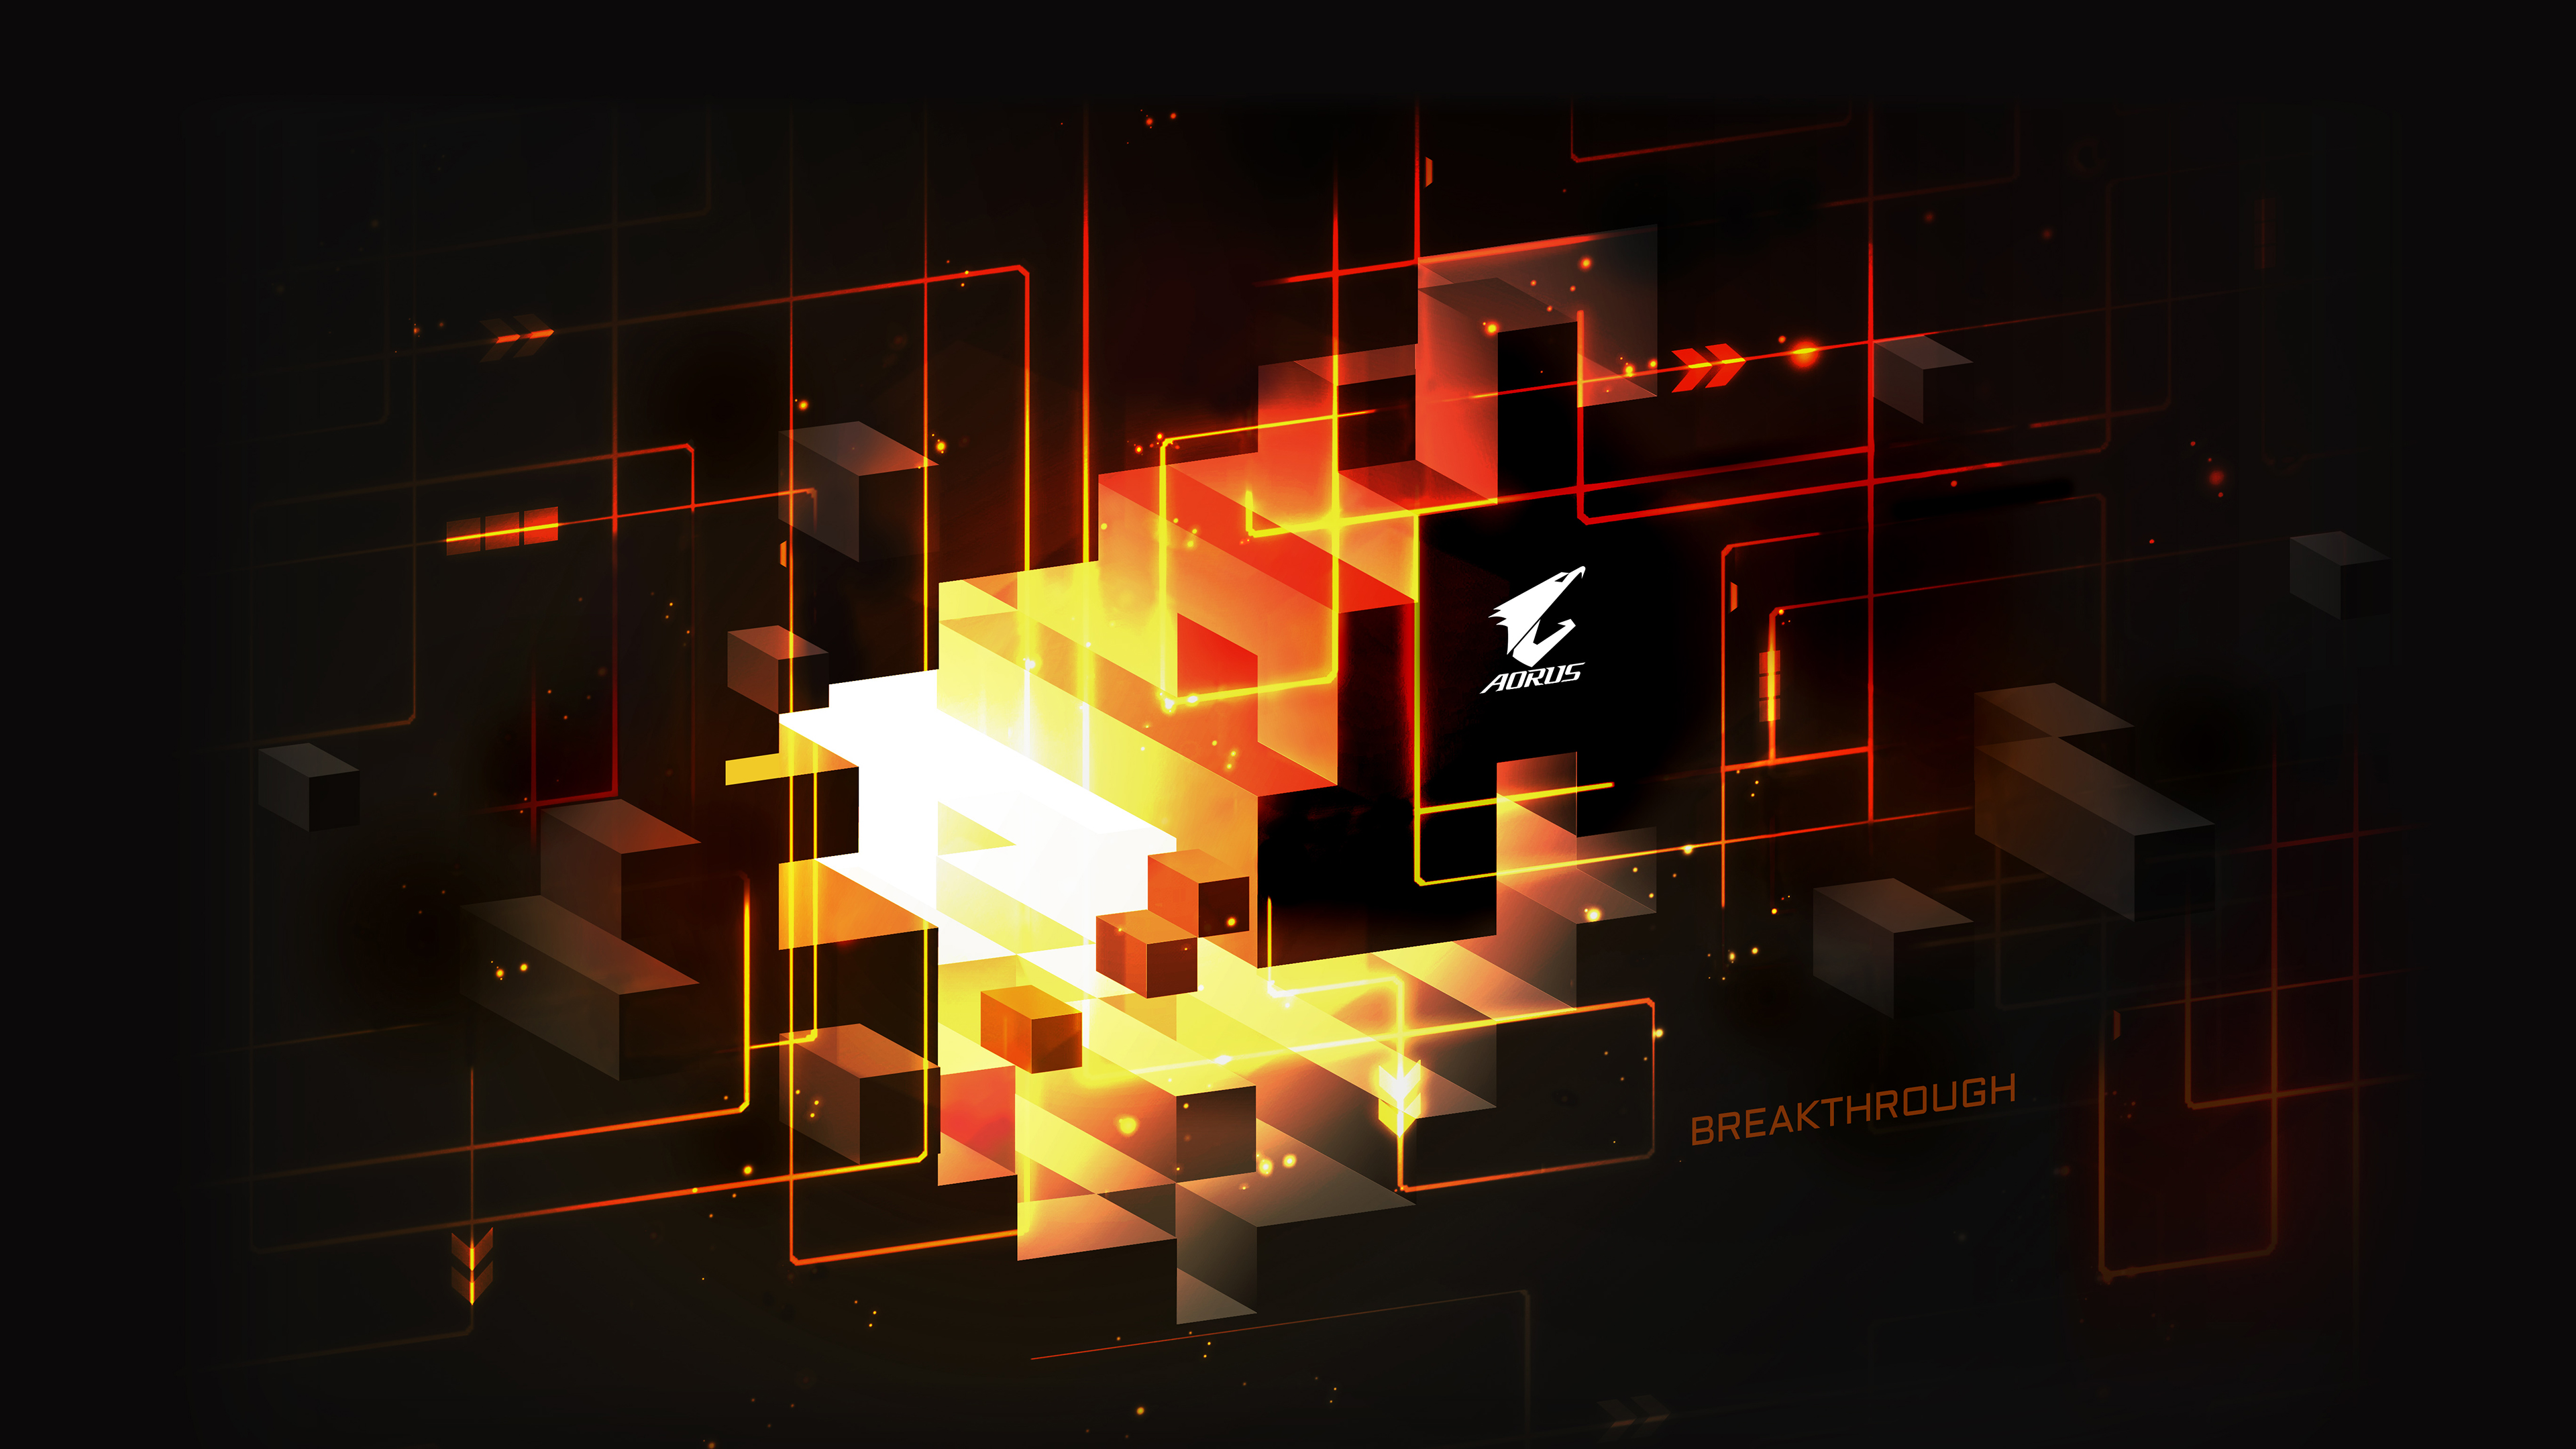 AORUS. Enthusiasts' Choice for PC gaming and esports